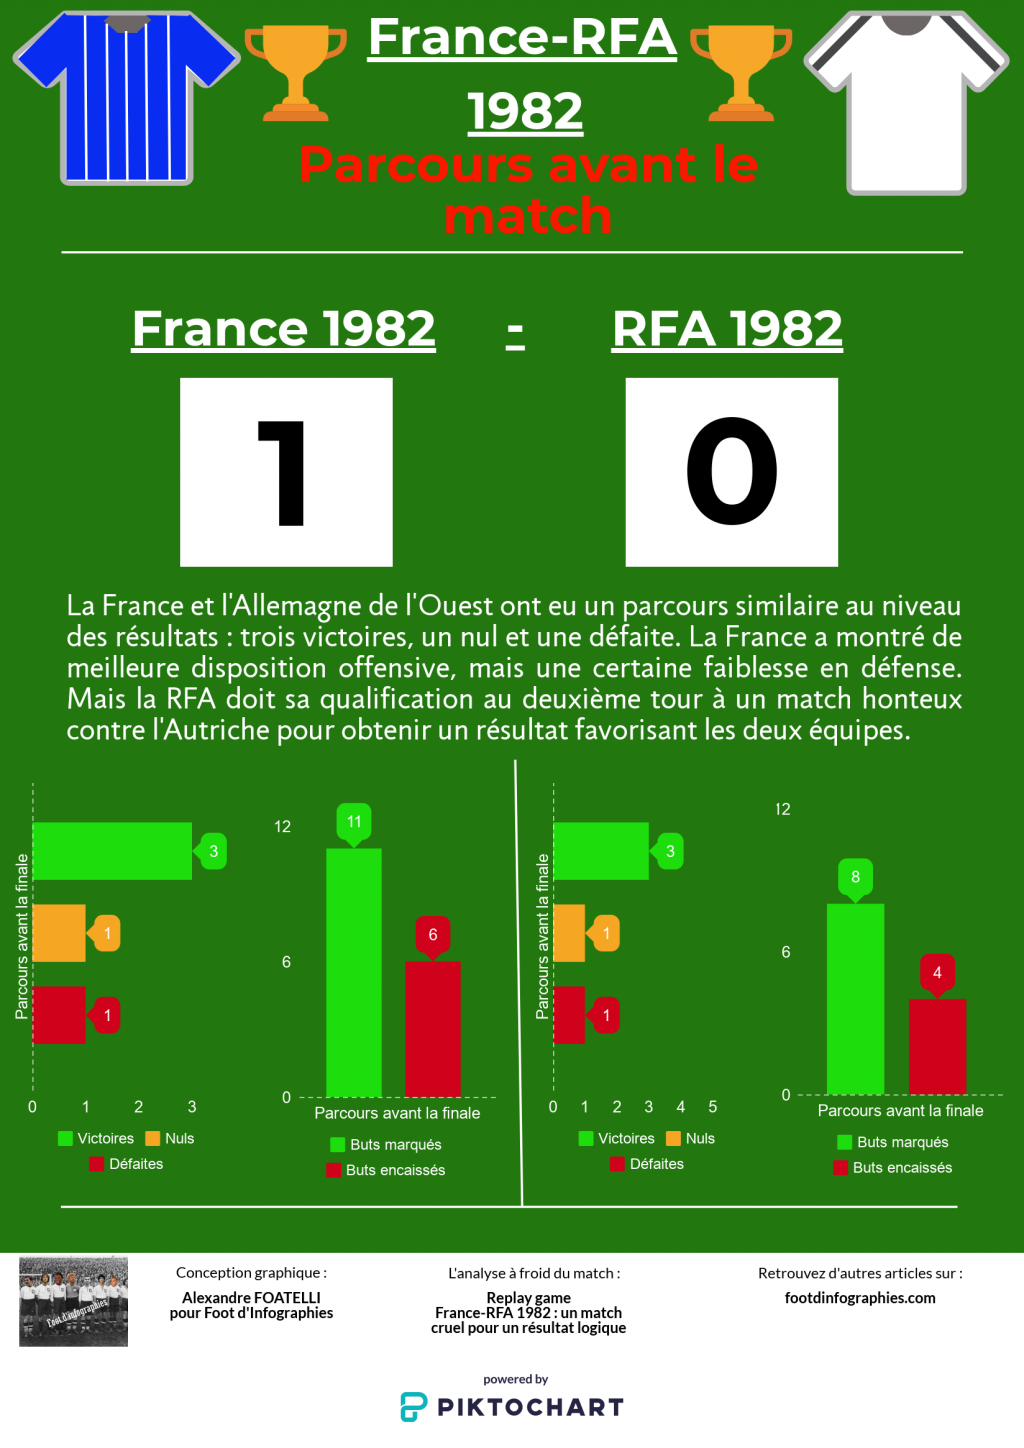 replay-game-france-rfa-1982-parcours-avant-match-foot-dinfographies